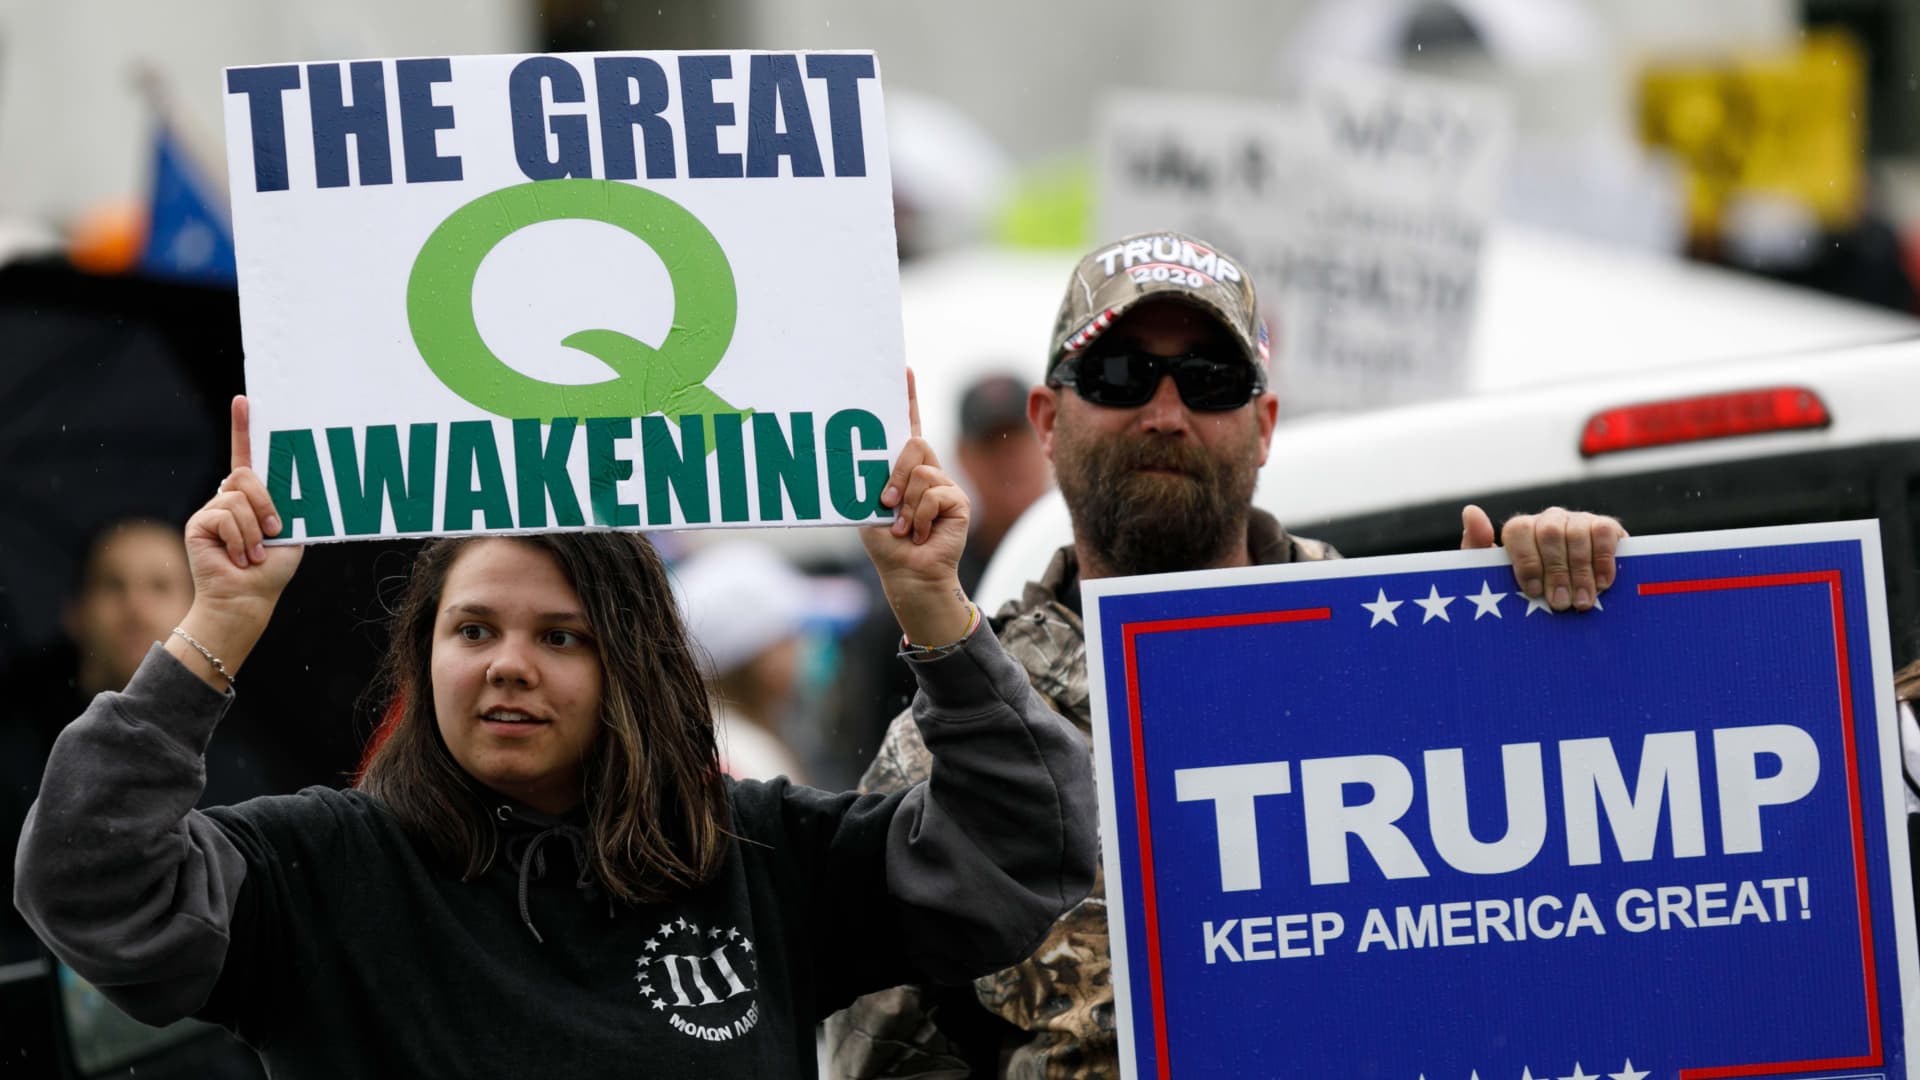 The Q-Anon conspiracy theorists hold signs during the protest at the State Capitol in Salem, Oregon, United States on May 2, 2020.